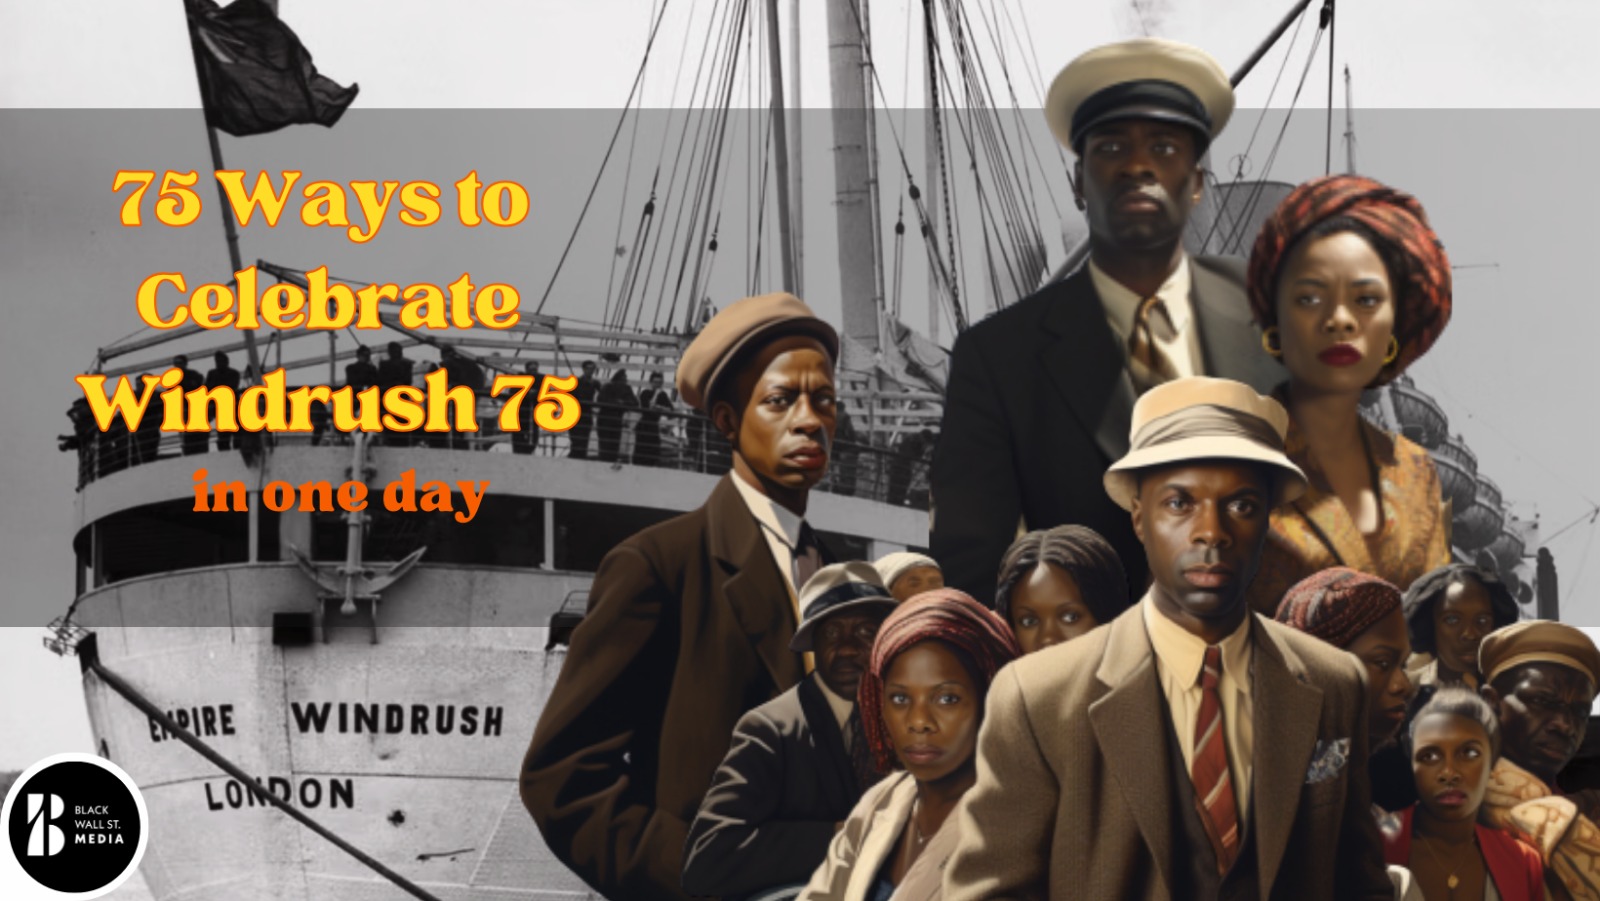 75 Ways to Celebrate Windrush75 in Just One Day